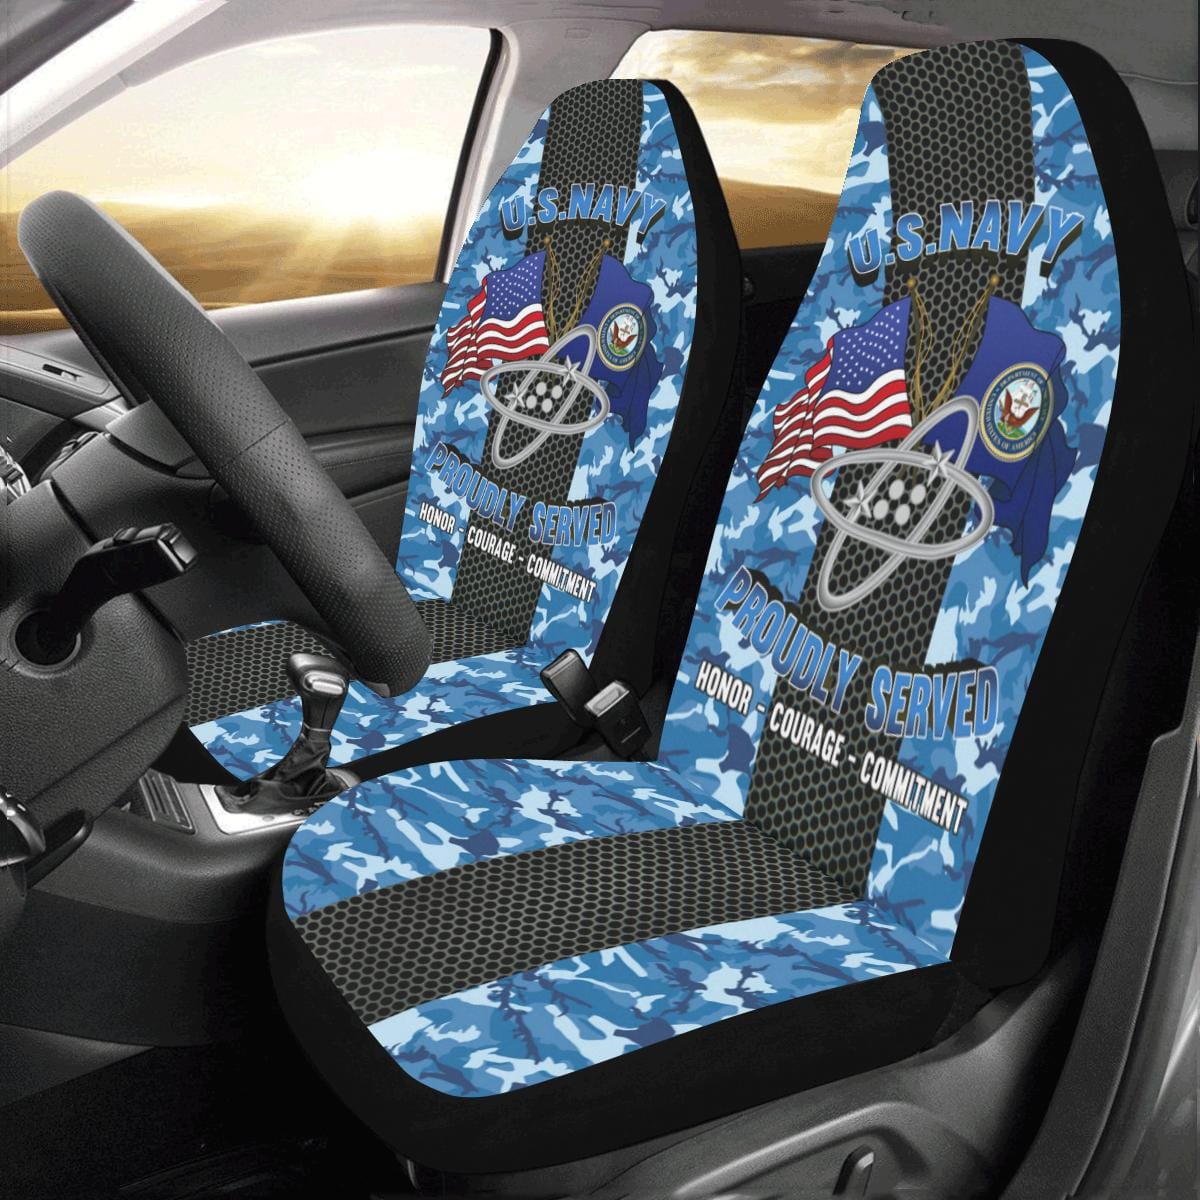 U.S Navy Electronics technician Navy ET Car Seat Covers (Set of 2)-SeatCovers-Navy-Rate-Veterans Nation